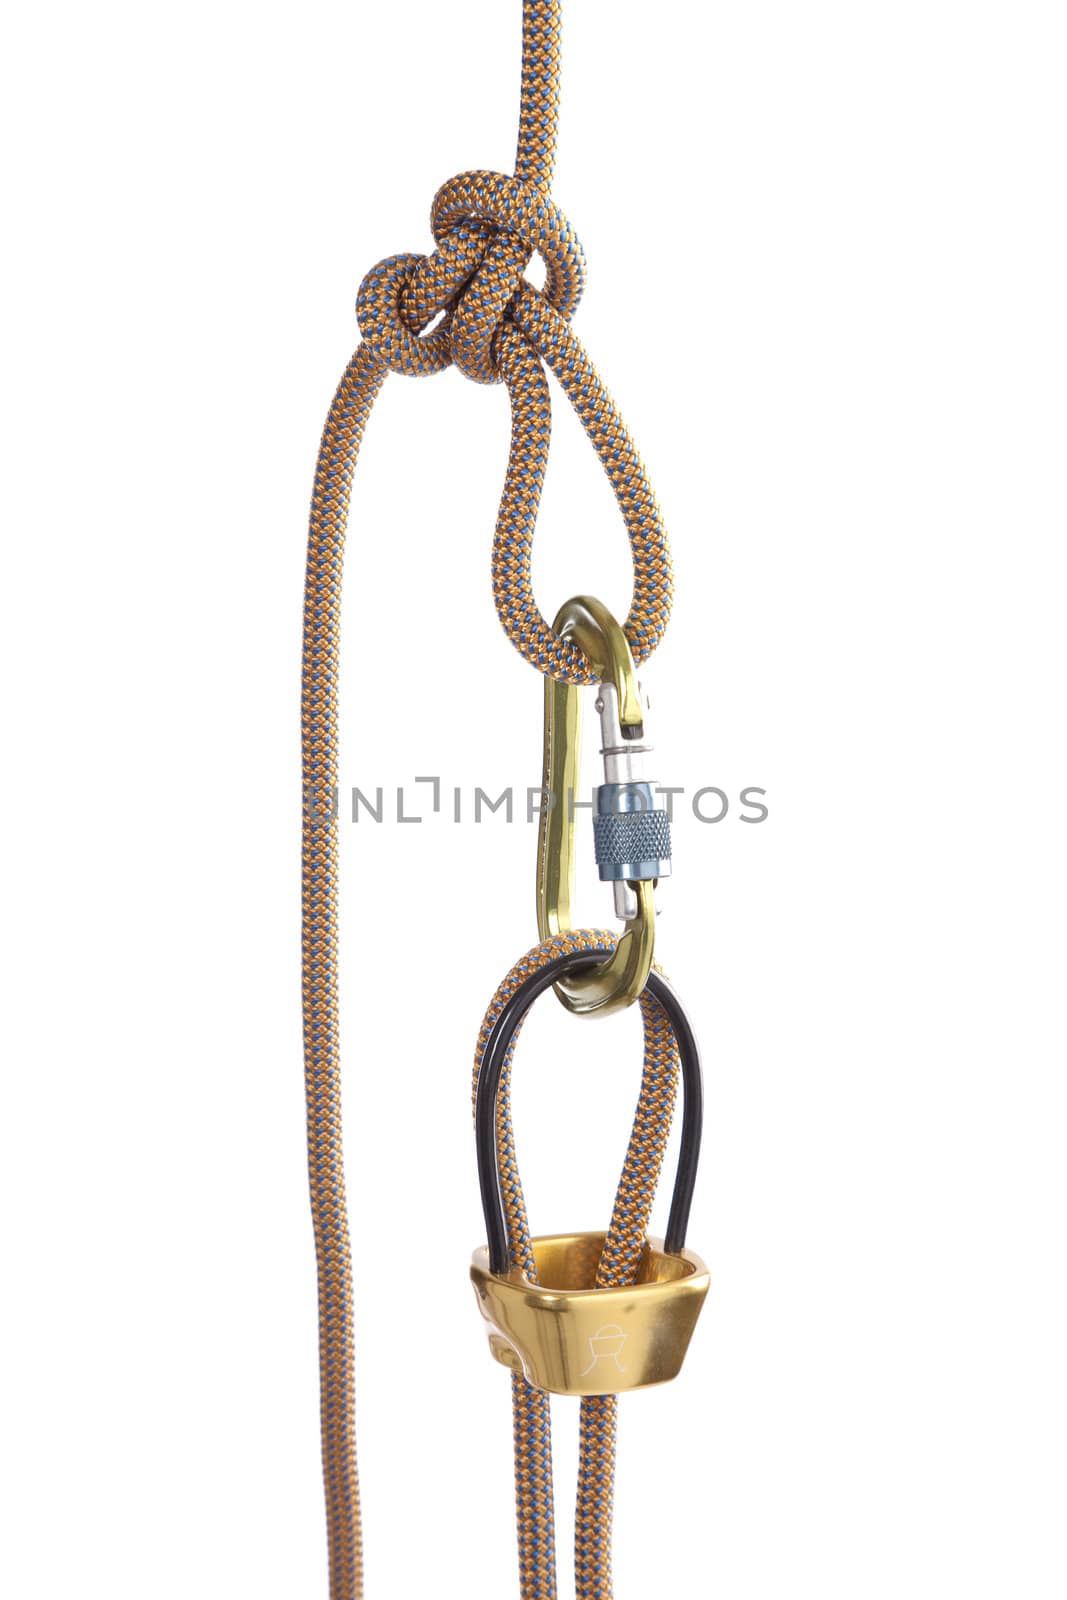 Climbing rope and carabiner by mjp